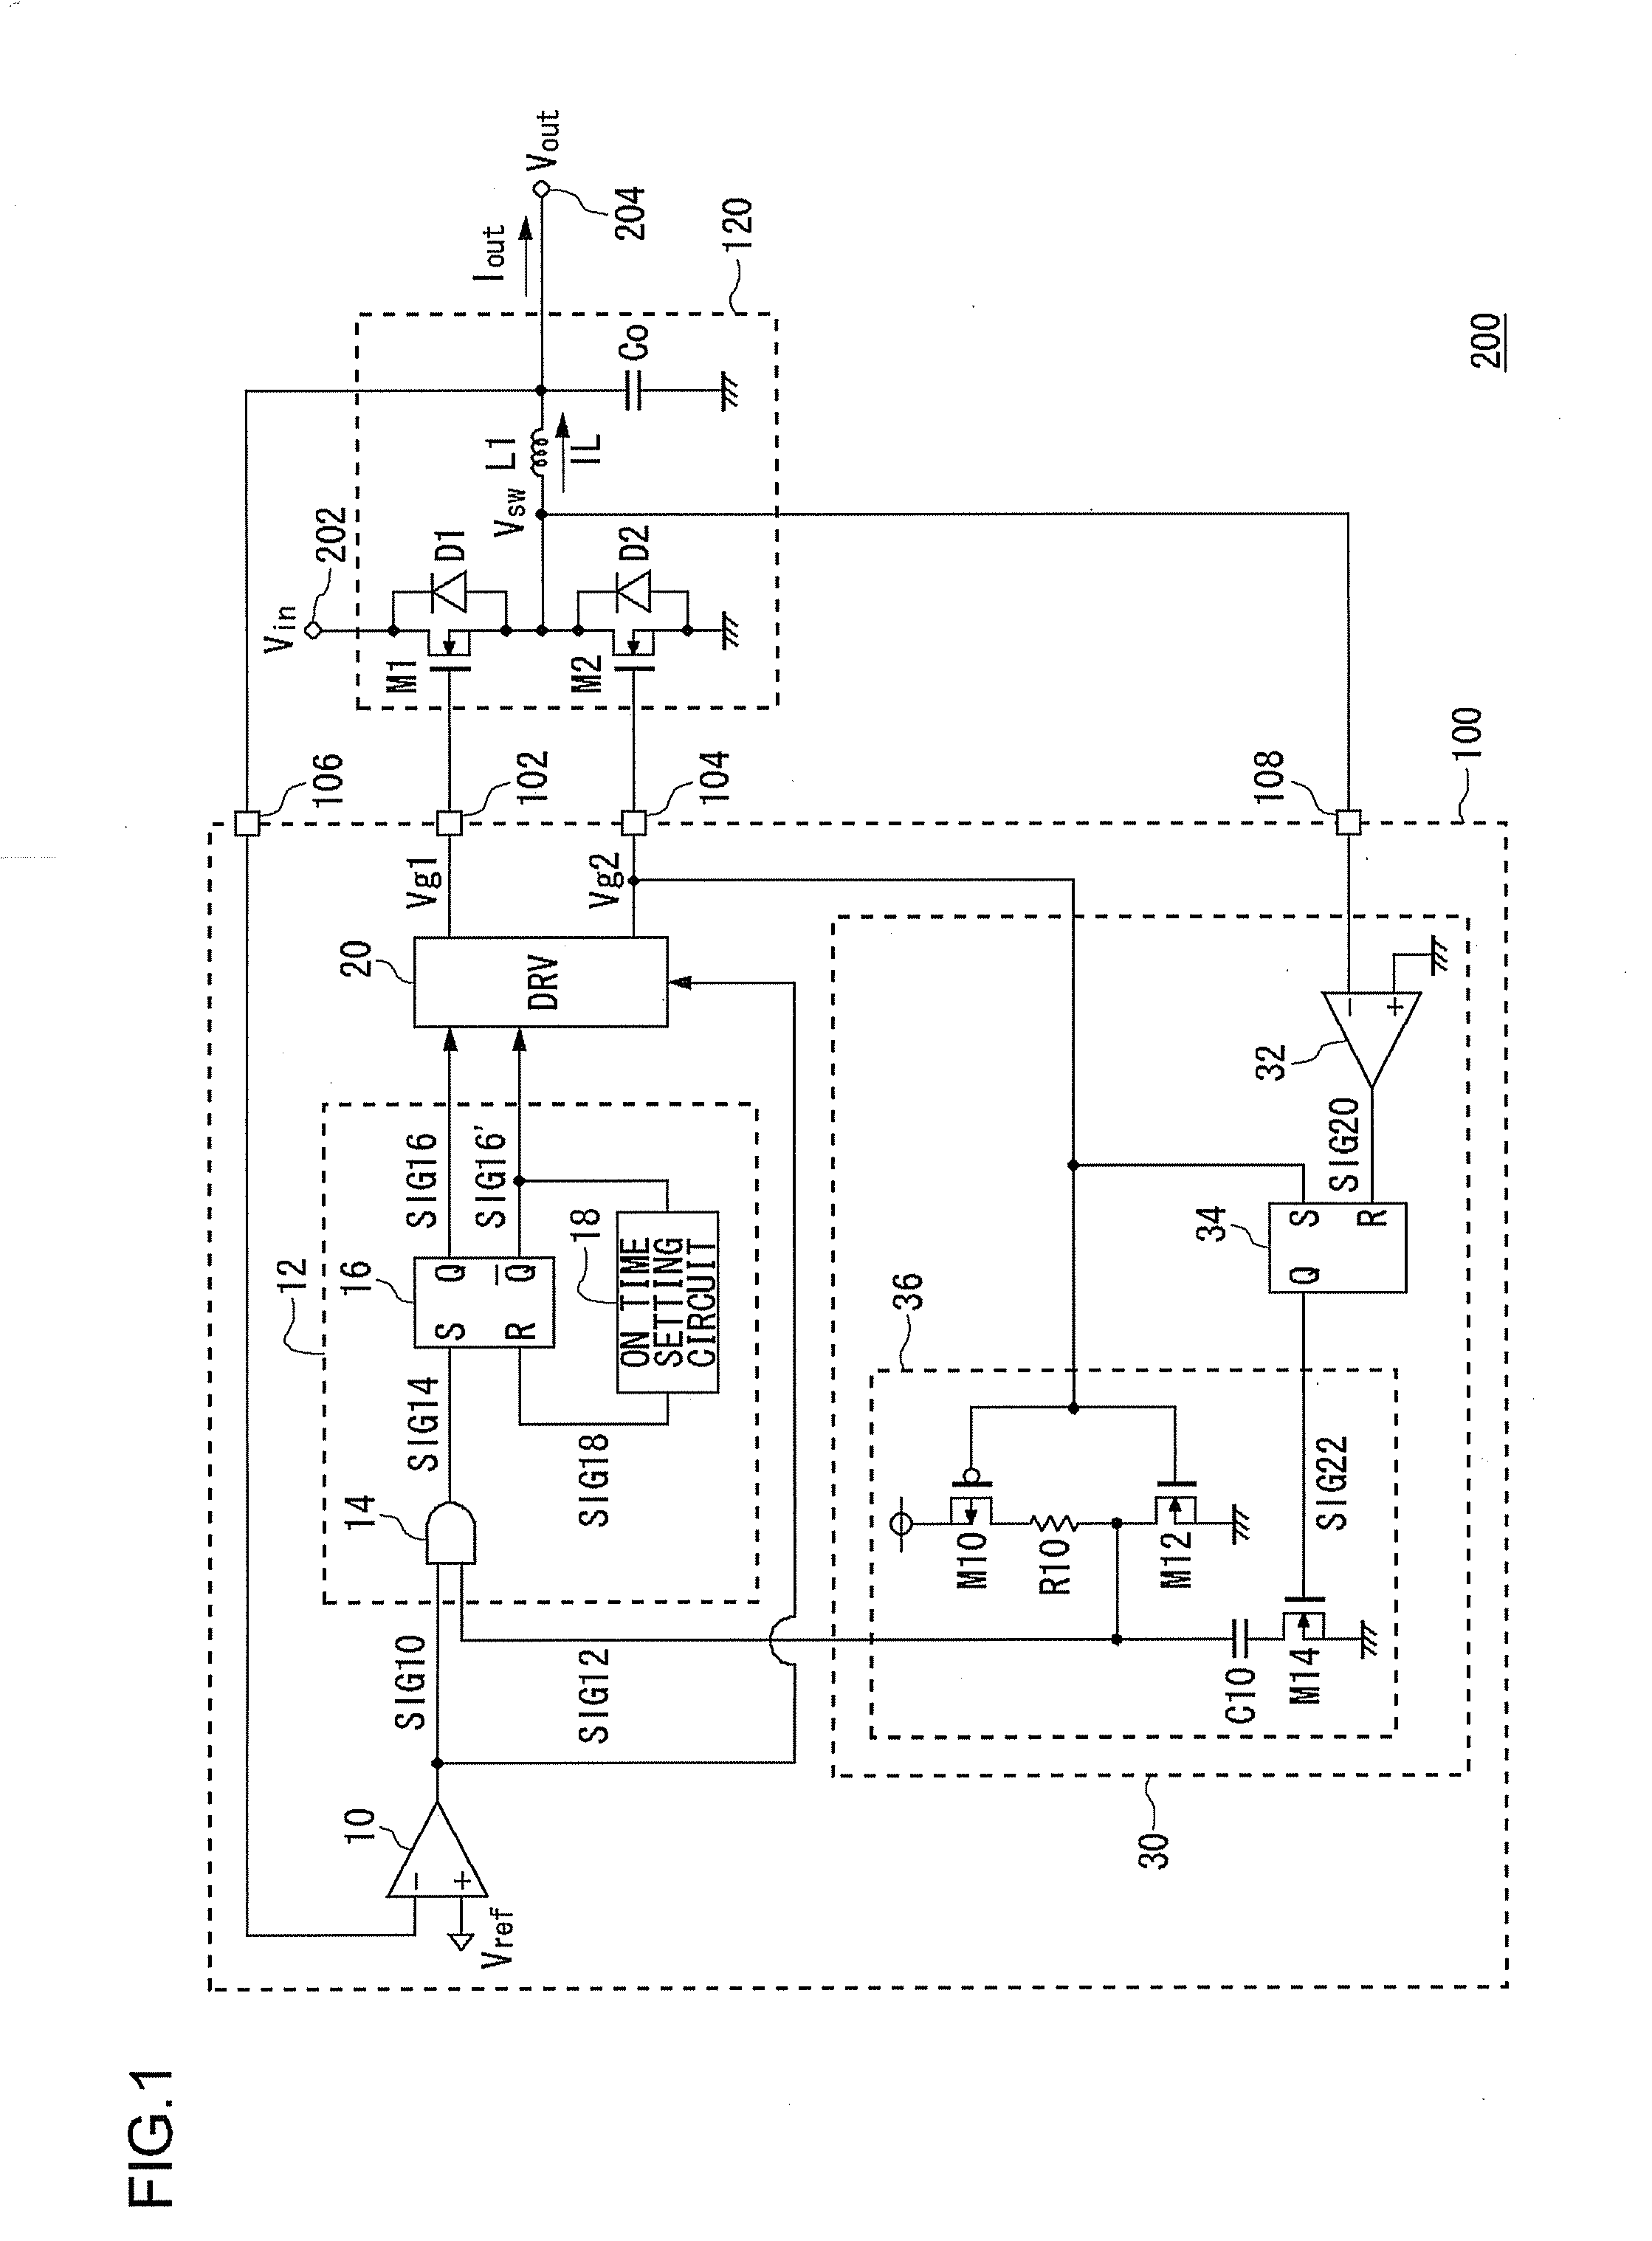 Step-down switching regulator, control circuit thereof, and electronic device using the same